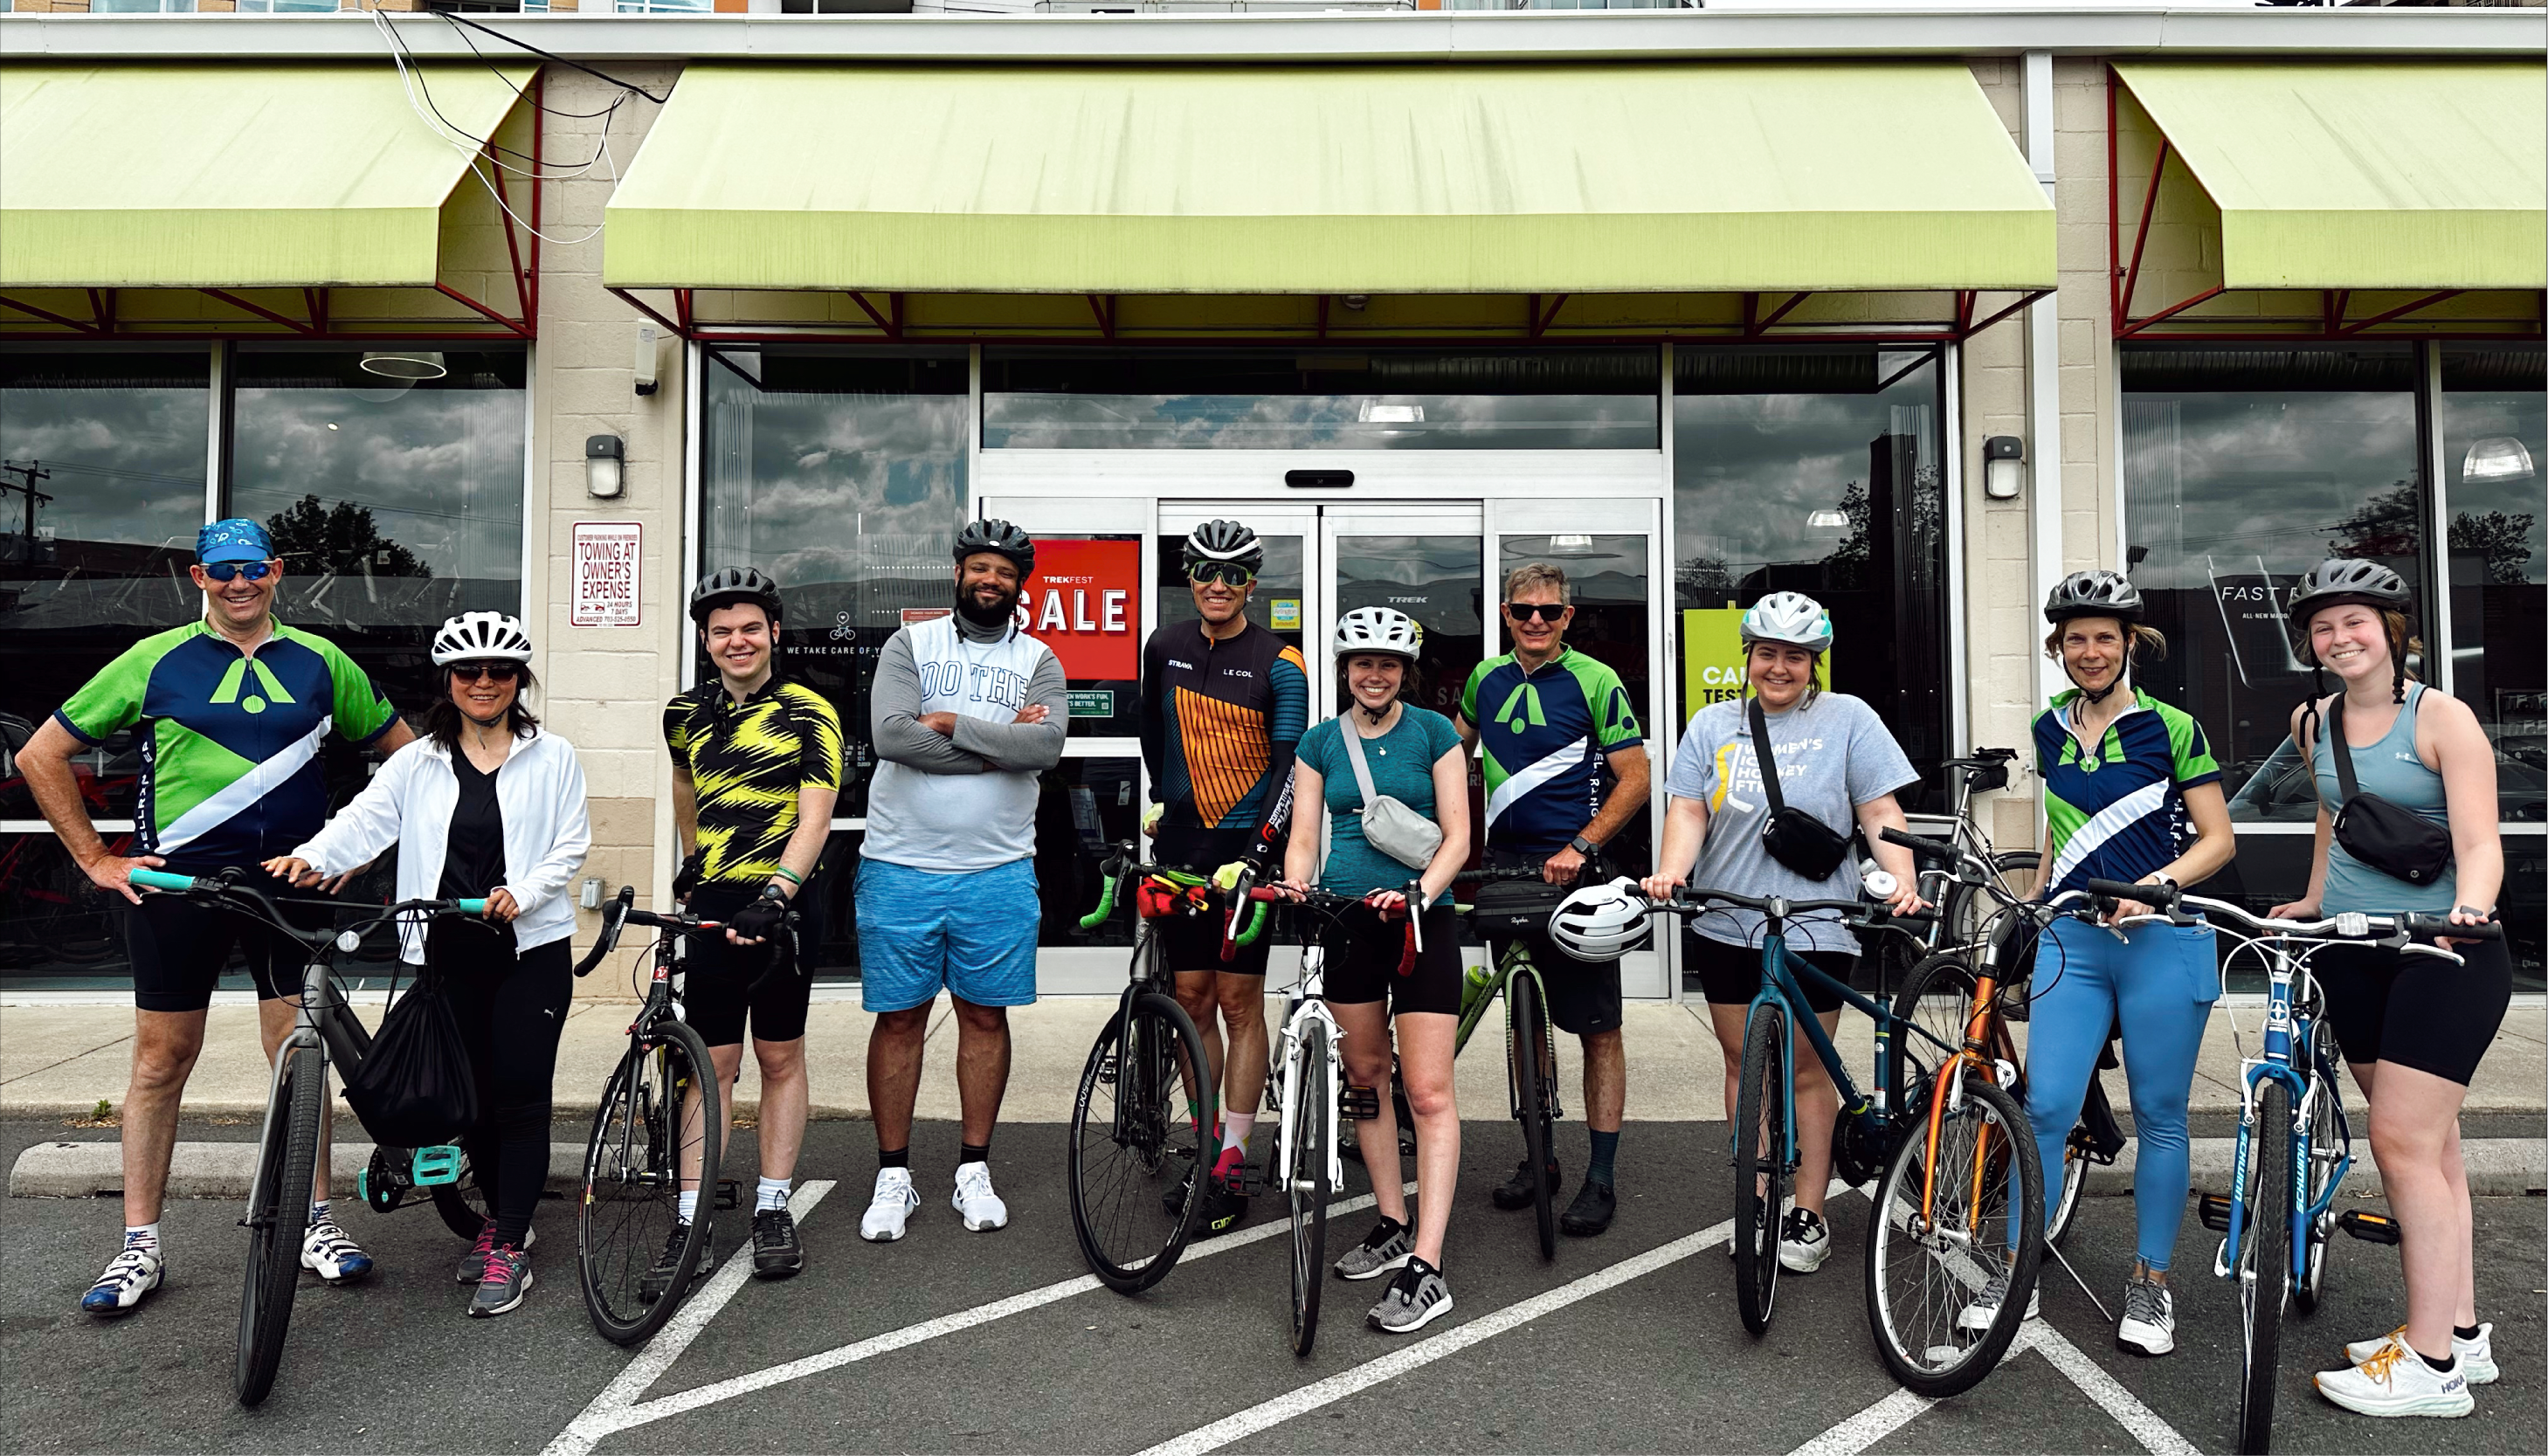 BellRinger riders standing next to their bikes in front of a store